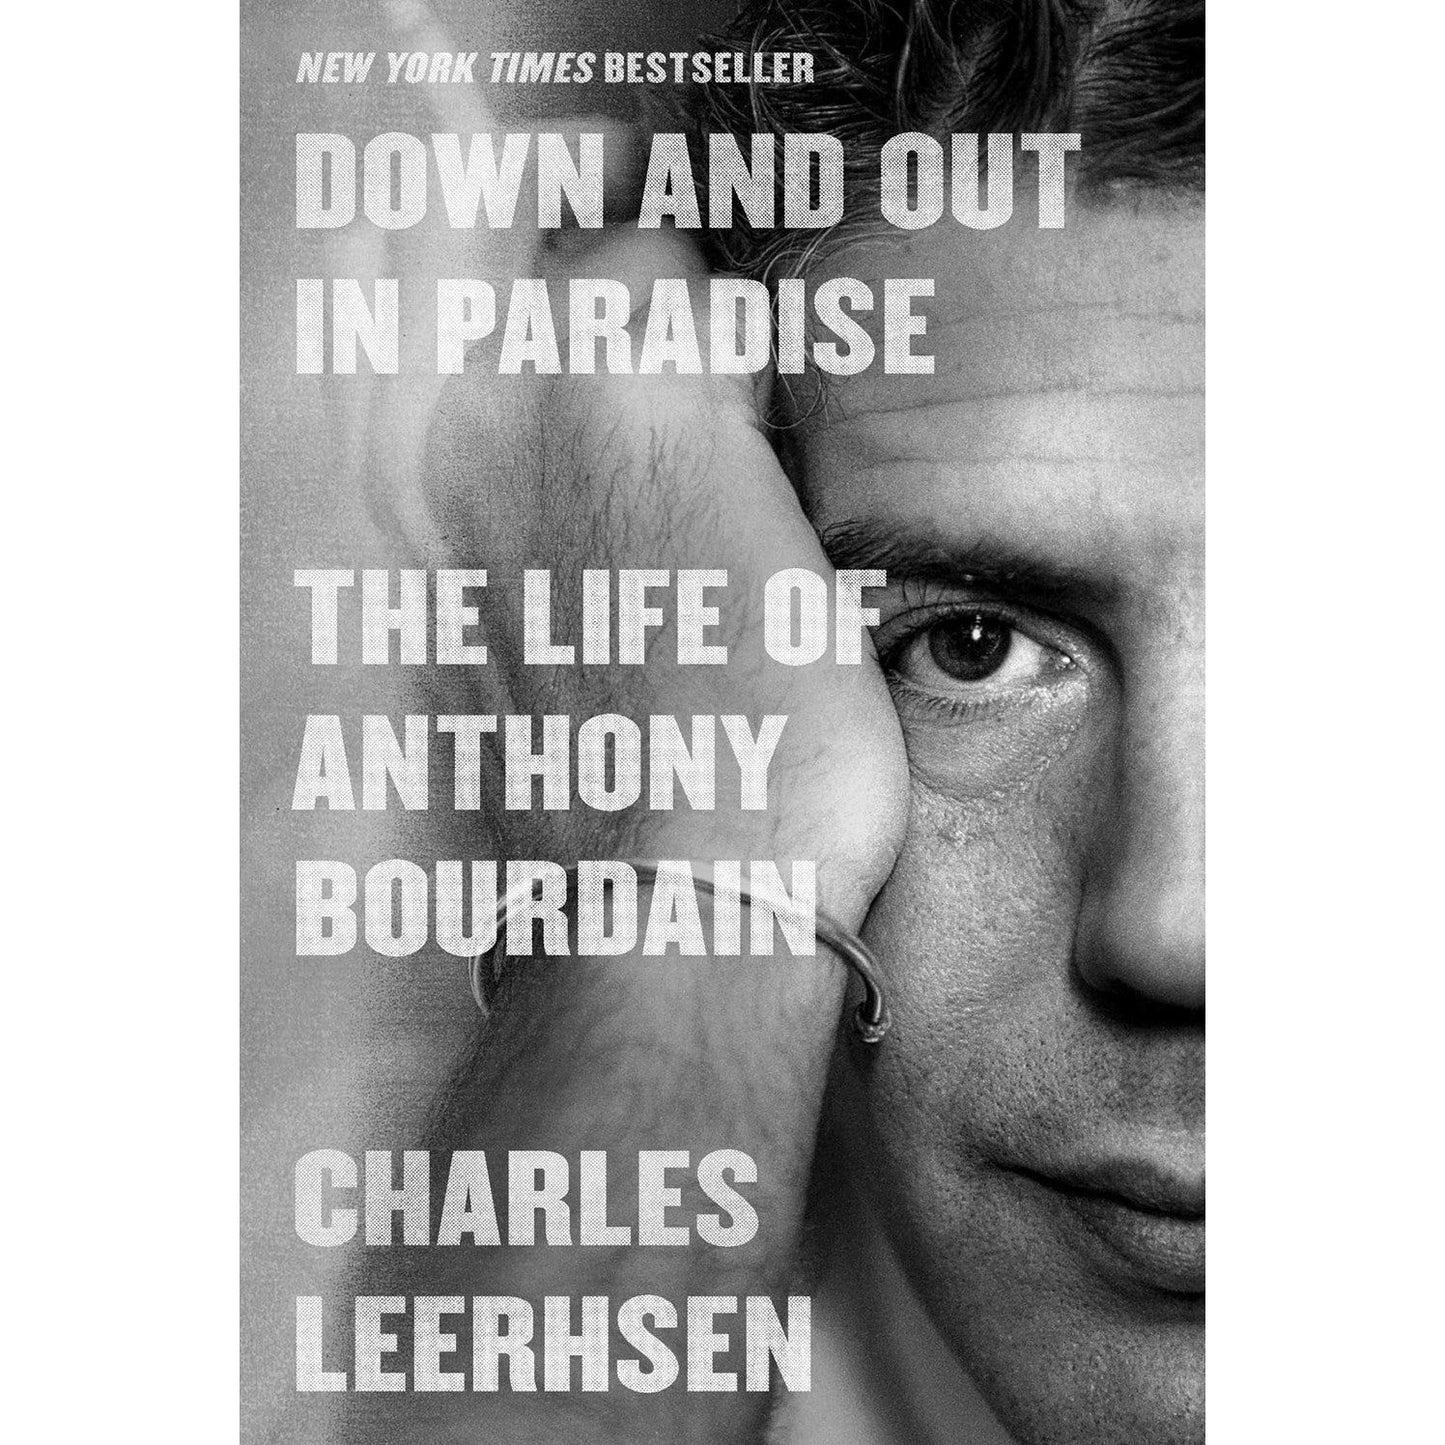 Down and Out in Paradise (Charles Leerhsen)